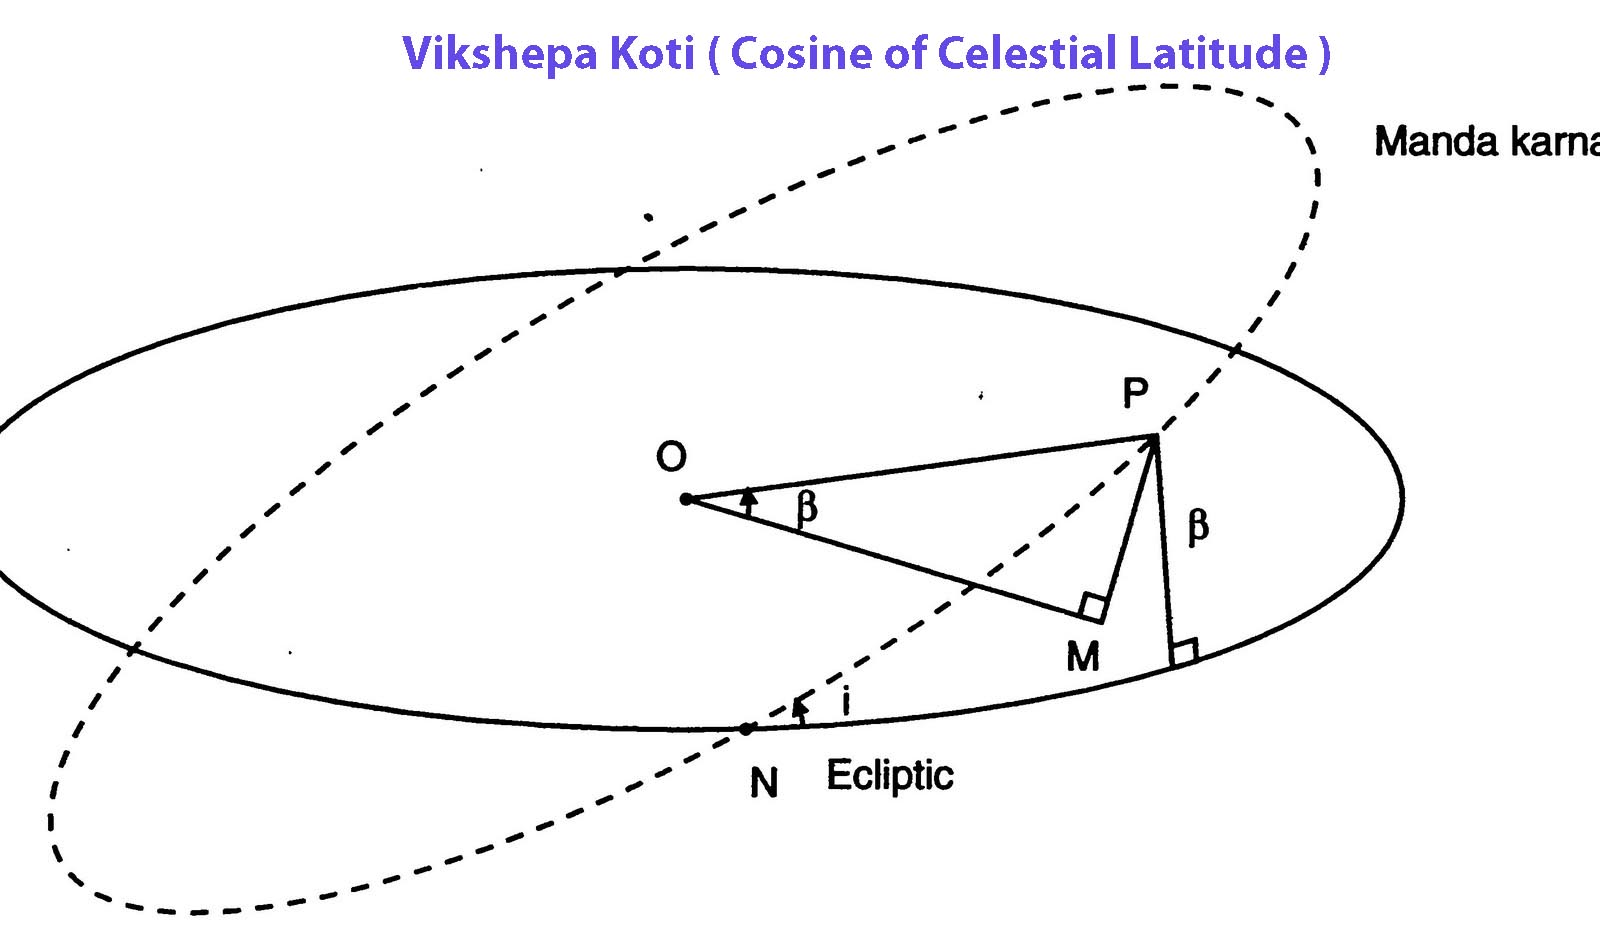 vedic astrology lesson 7.vikshepa koti, cos l, hindu astrology software, research and consultancy